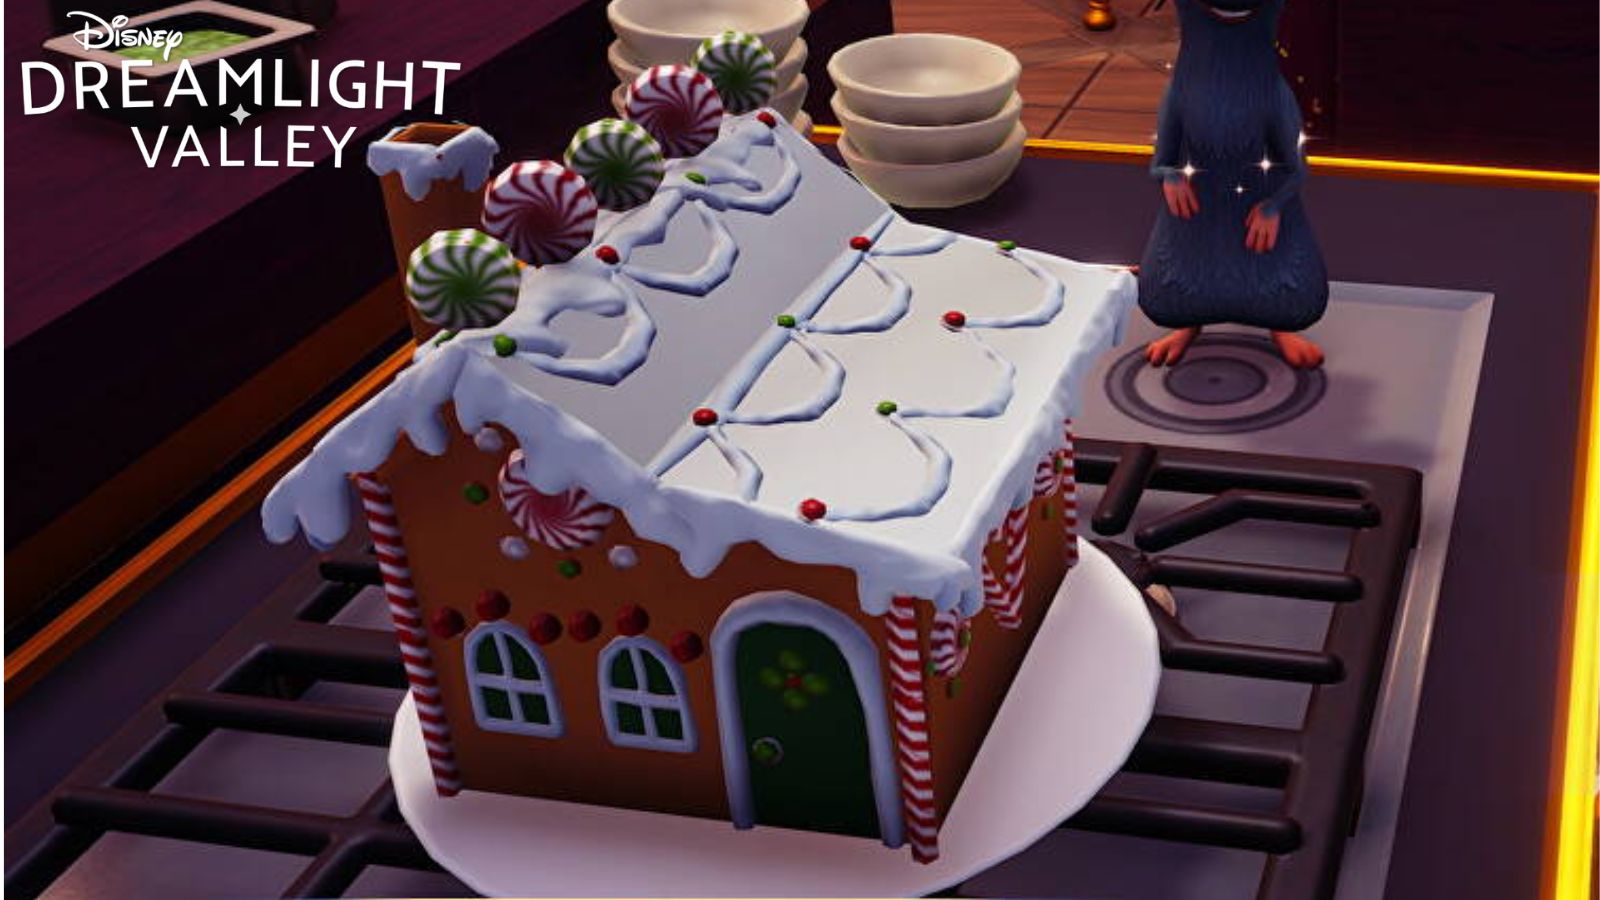 Disney Dreamlight Valley Gingerbread House recipe & how to make it